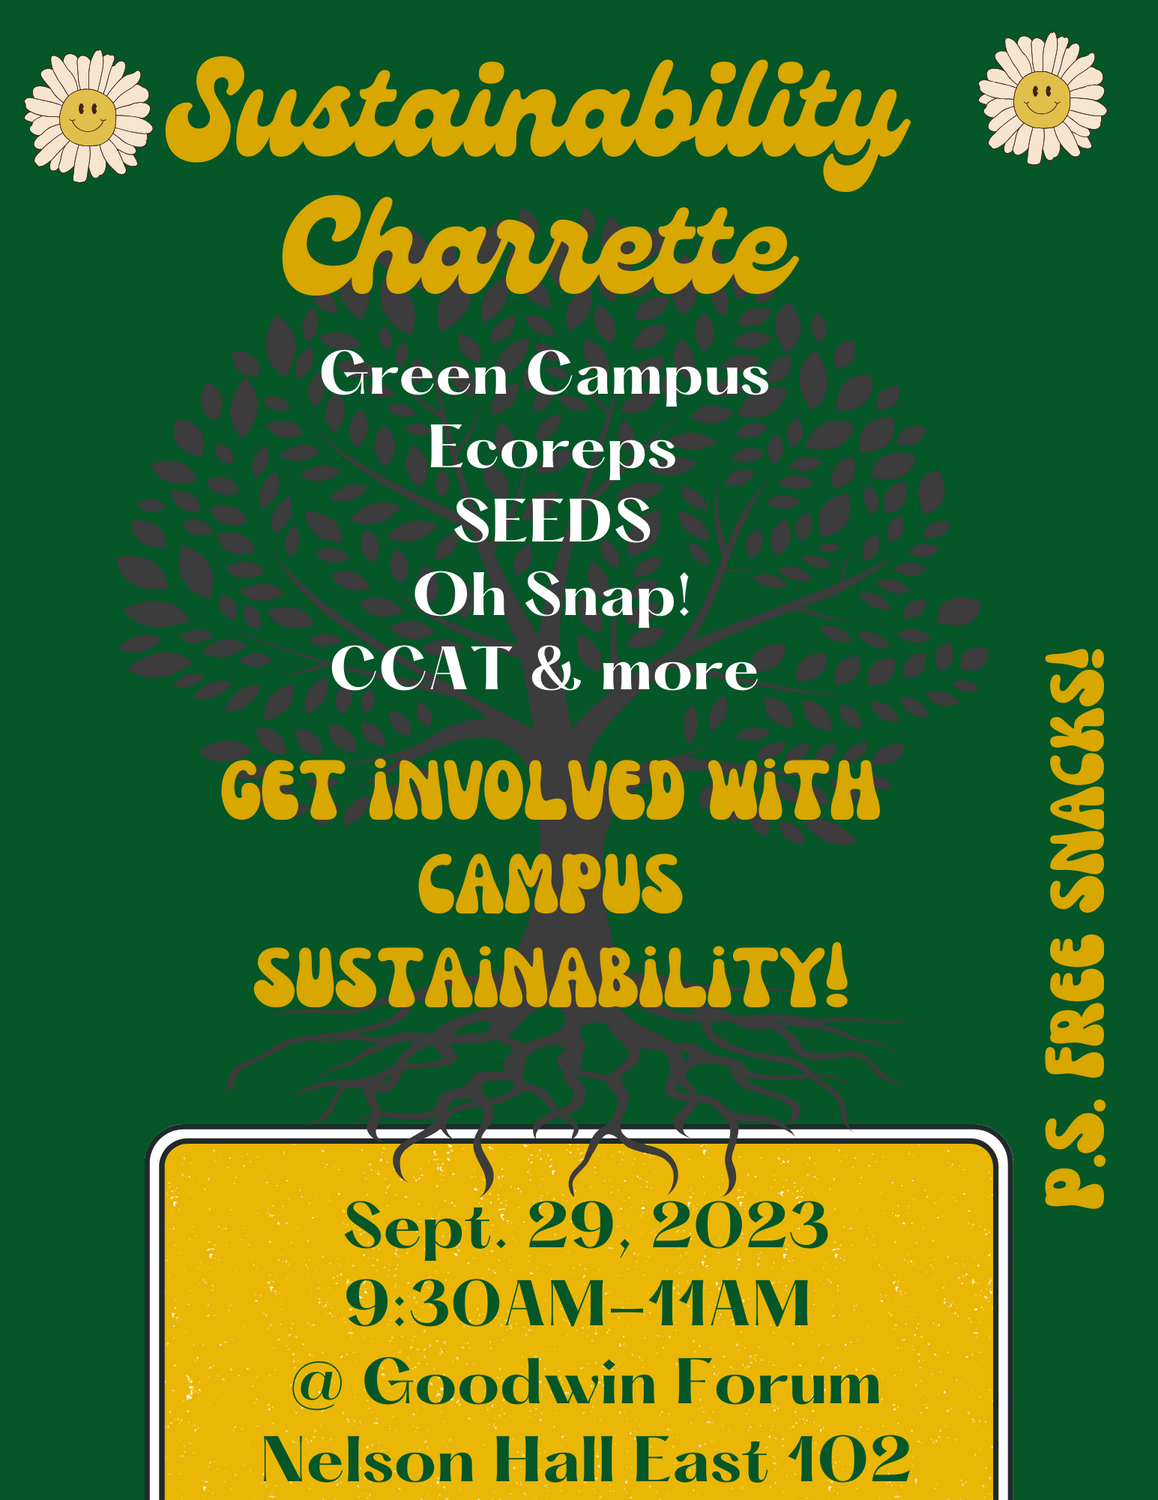 Sustainability Event Charrette flyer, green background, daisy flowers and tree icons in background. Friday Sept 29th Goodwin Forum Nelson Hall East 102 9:30am- 11am